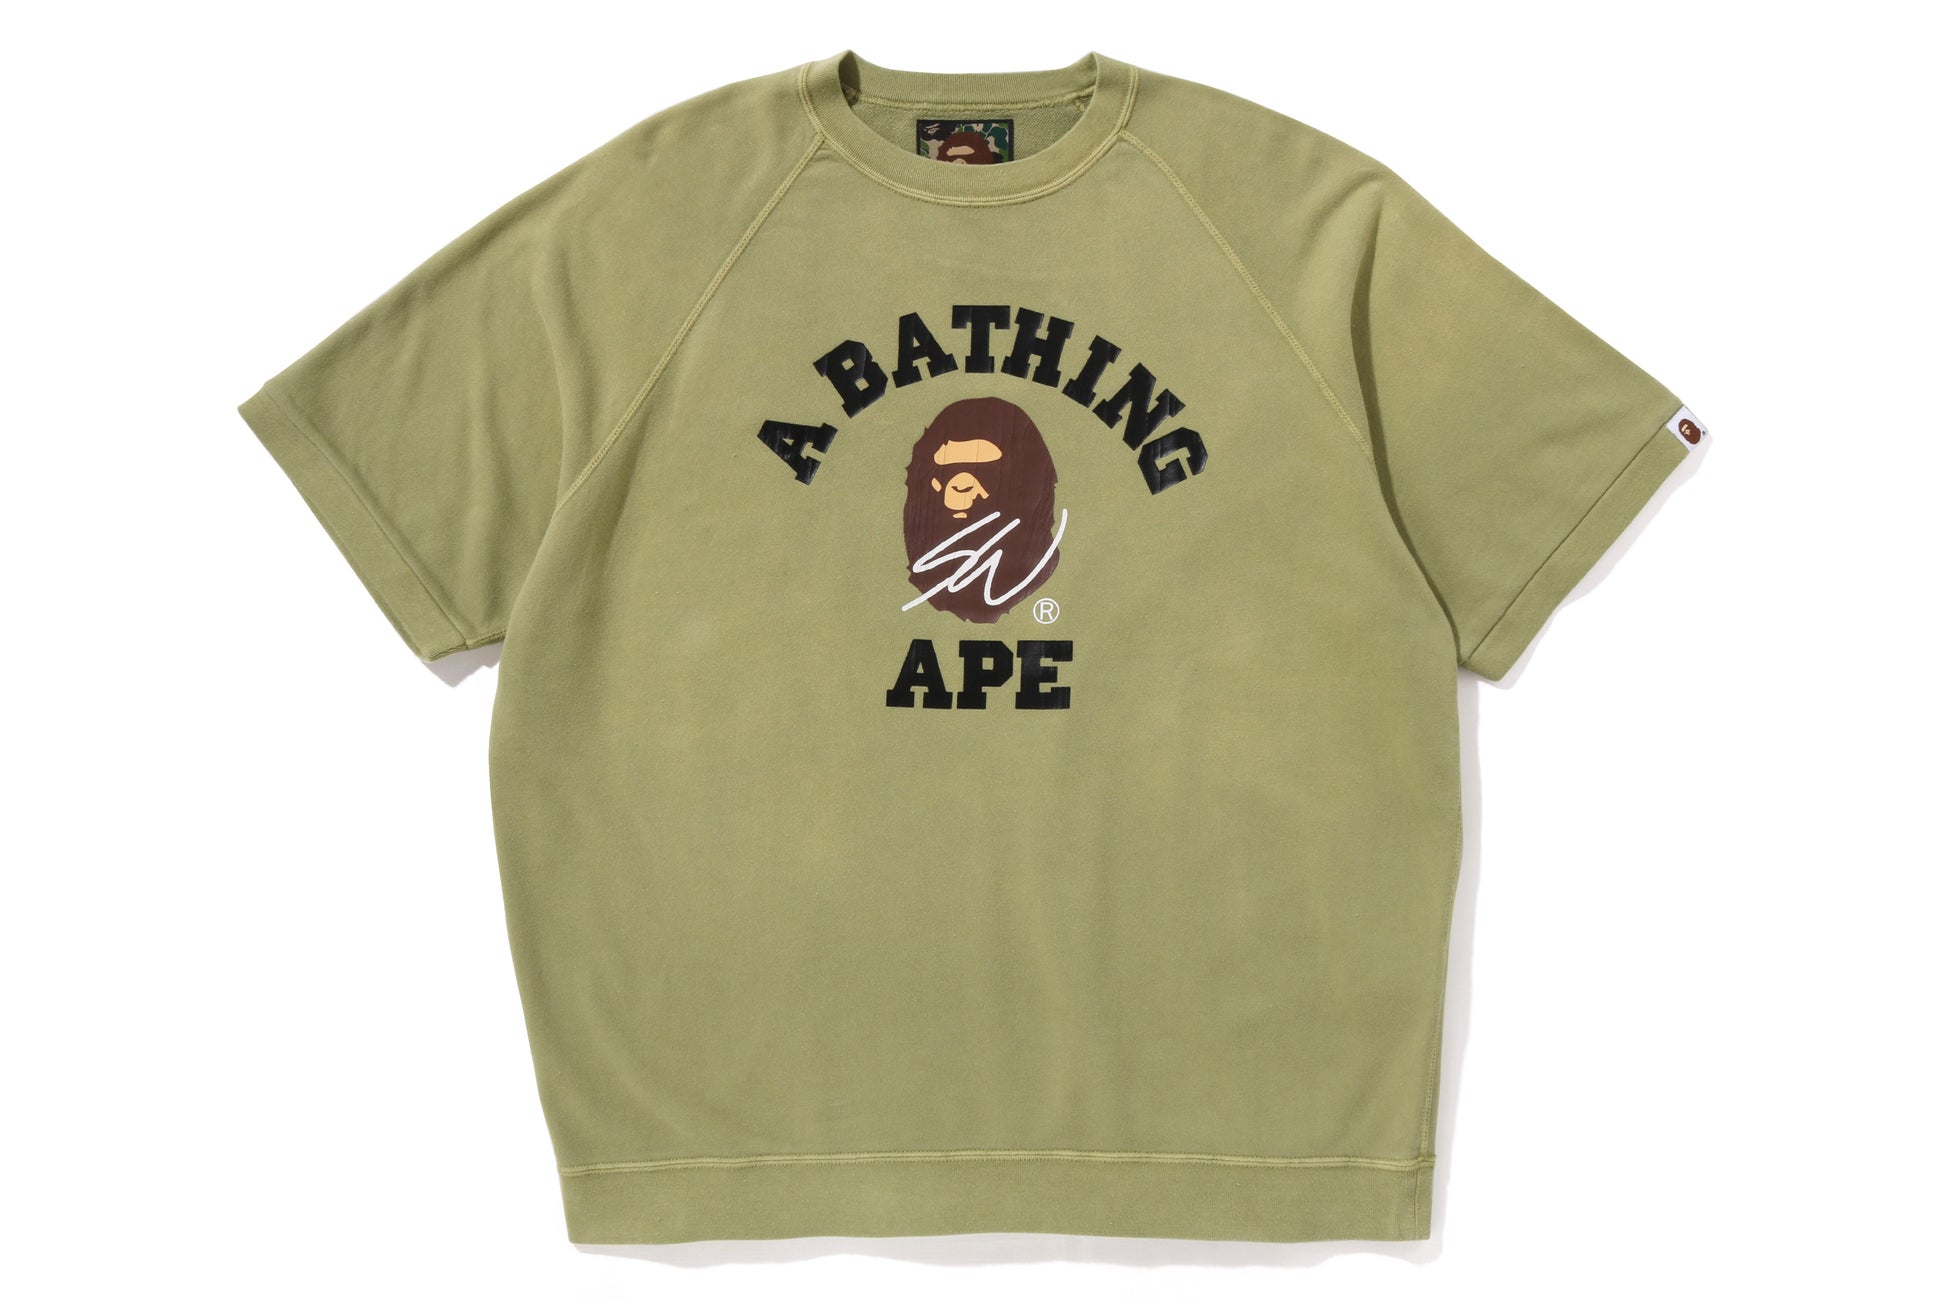 A BATHING APE®️ x Sean Wotherspoon